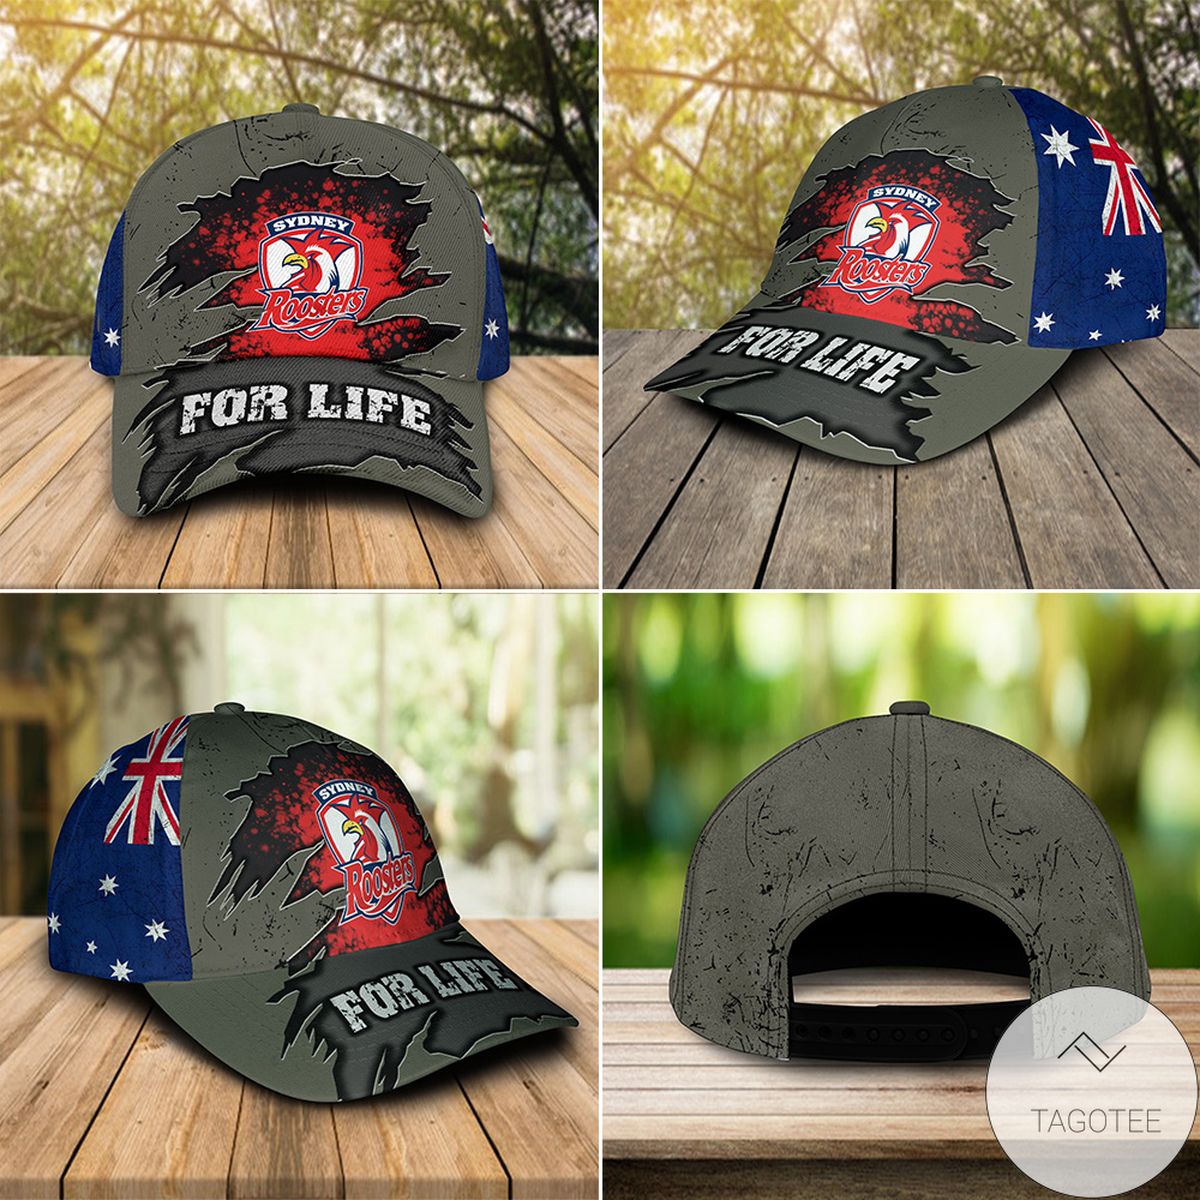 Sydney Roosters For Life Cap